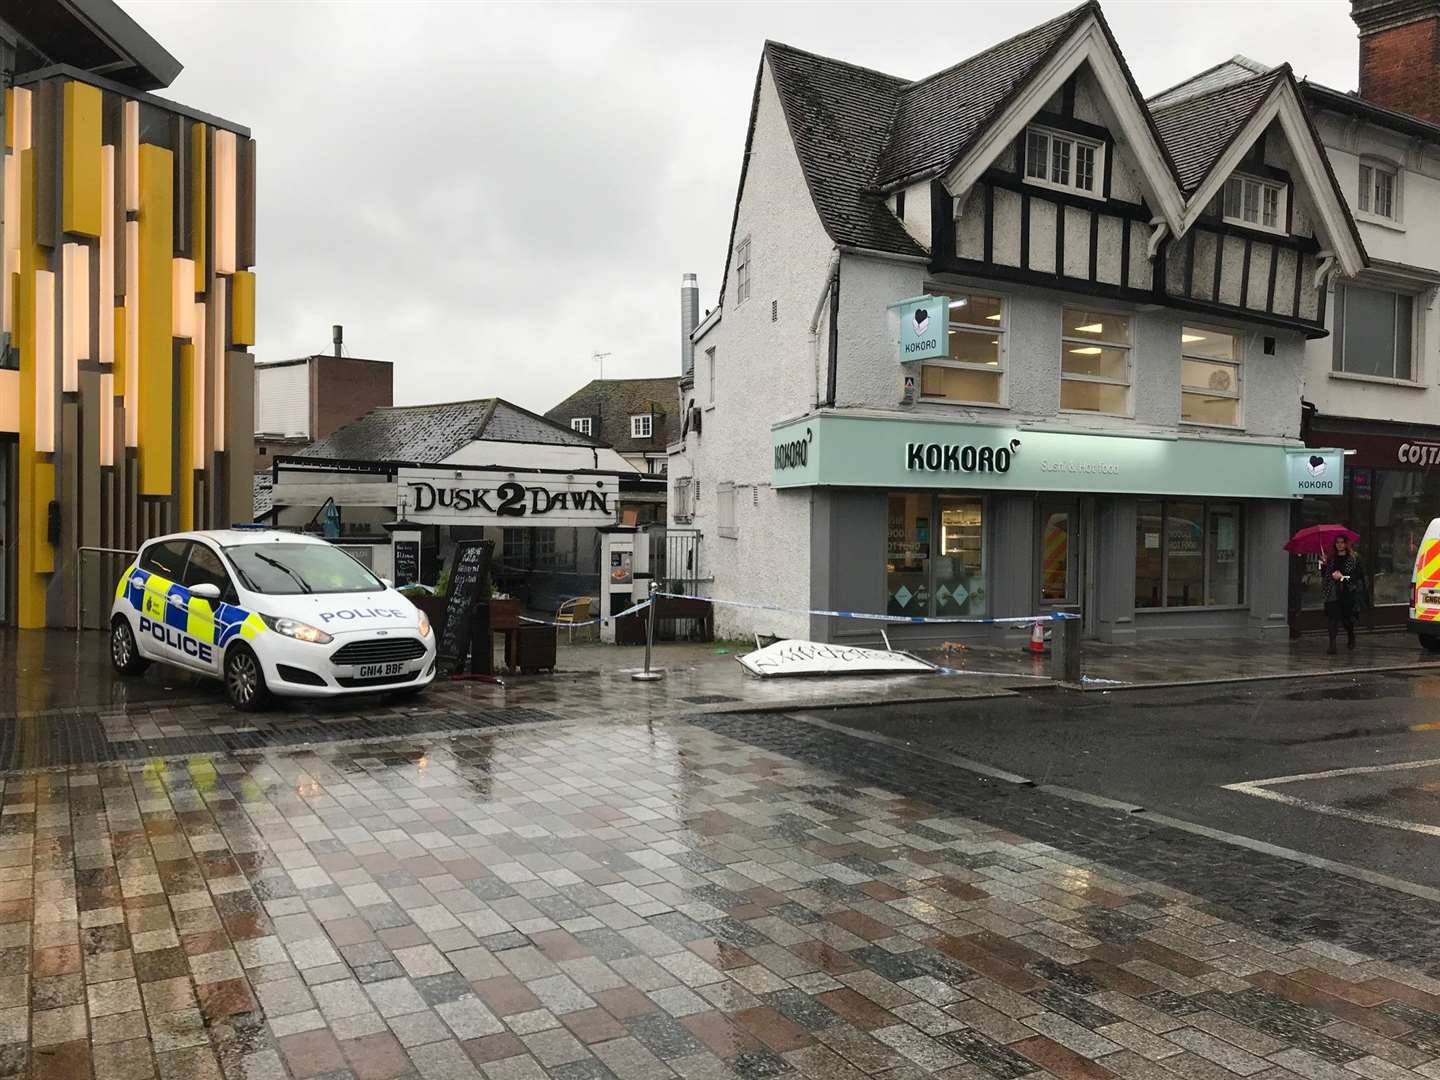 Police have cordoned off the entrance to Dusk 2 Dawn in Maidstone (4334274)